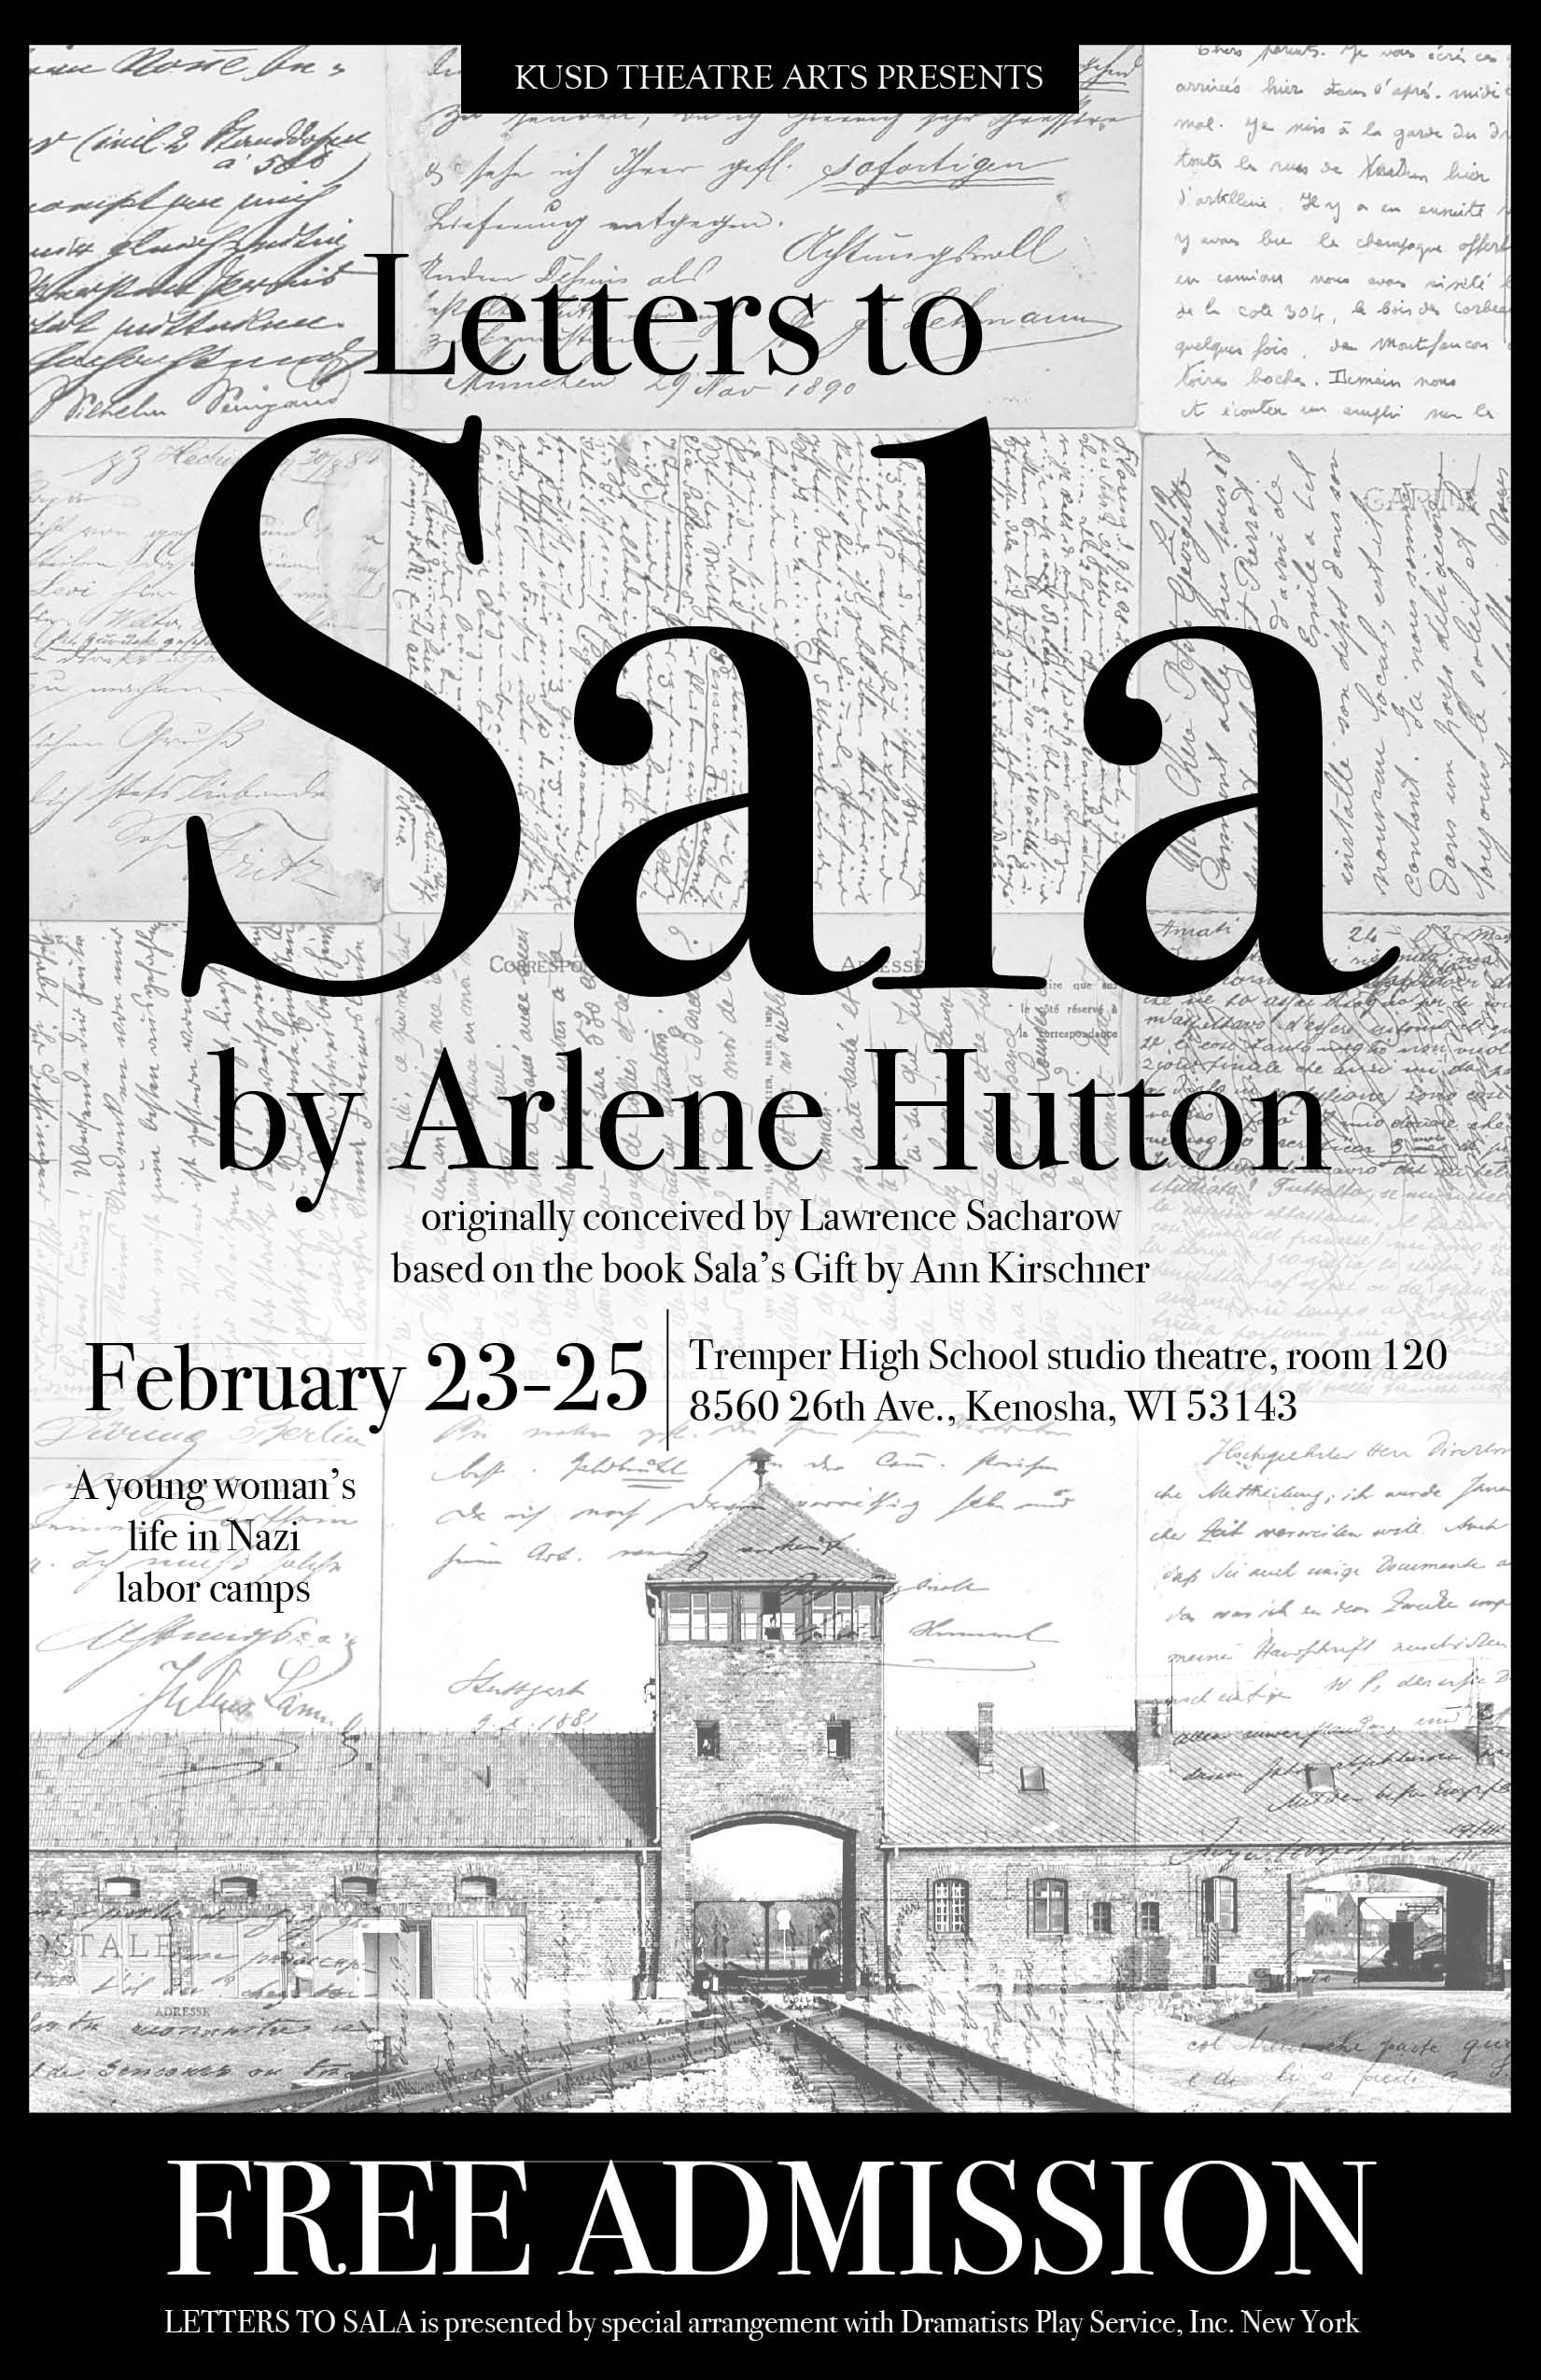 The poster for Letters To Sala